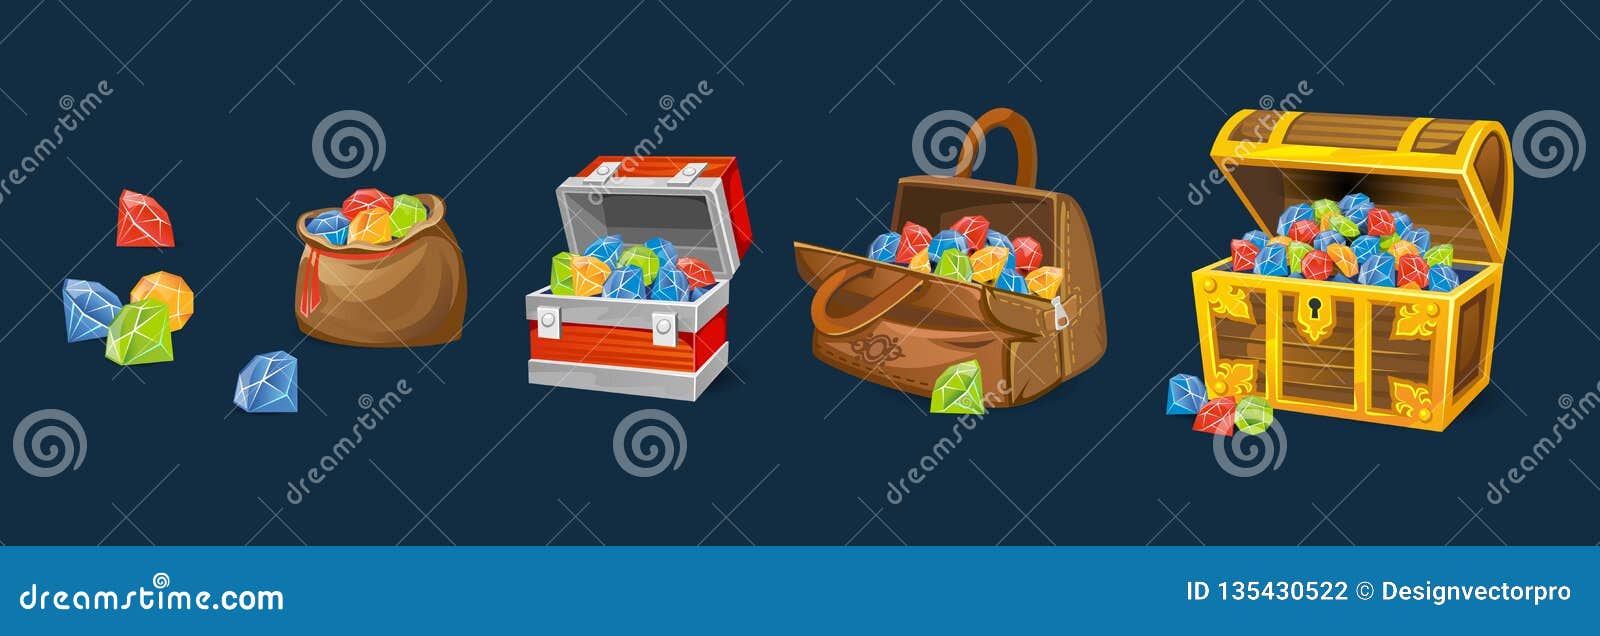 gems chests set on blue background. cartoon money chests for games, books etc.